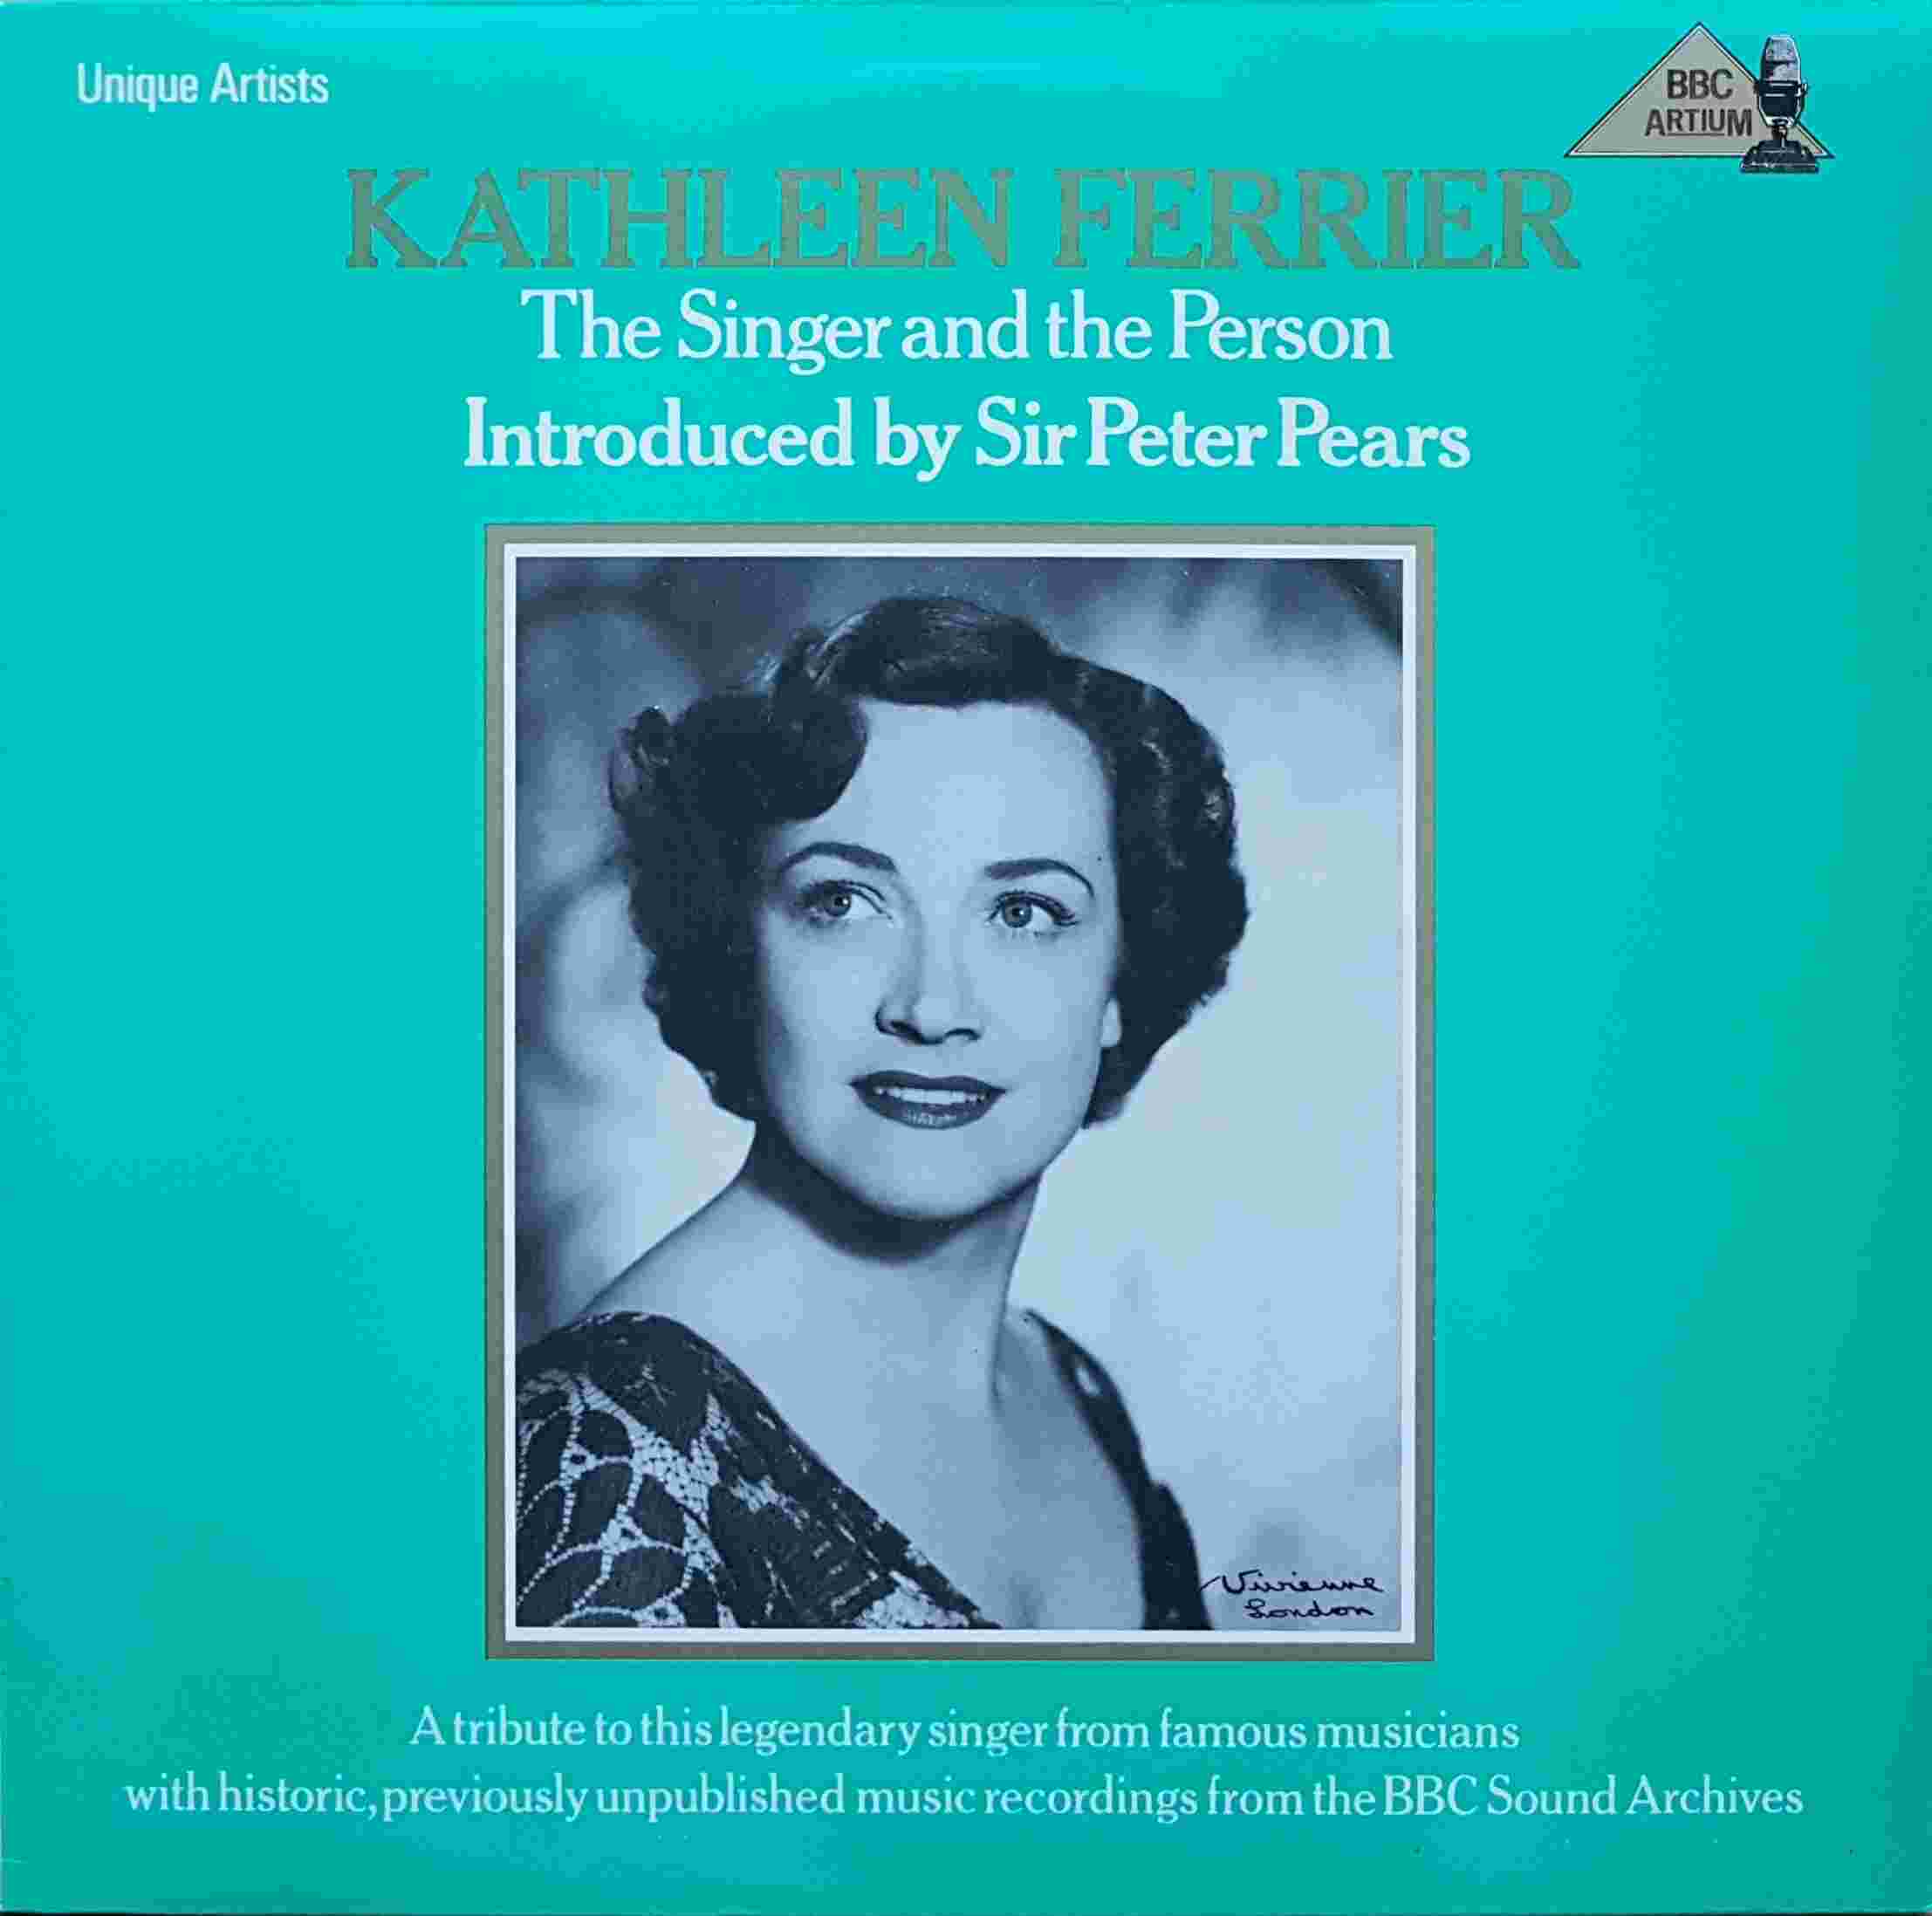 Picture of REGL 368 Kathleen Ferrier by artist Kathleen Ferrier from the BBC albums - Records and Tapes library